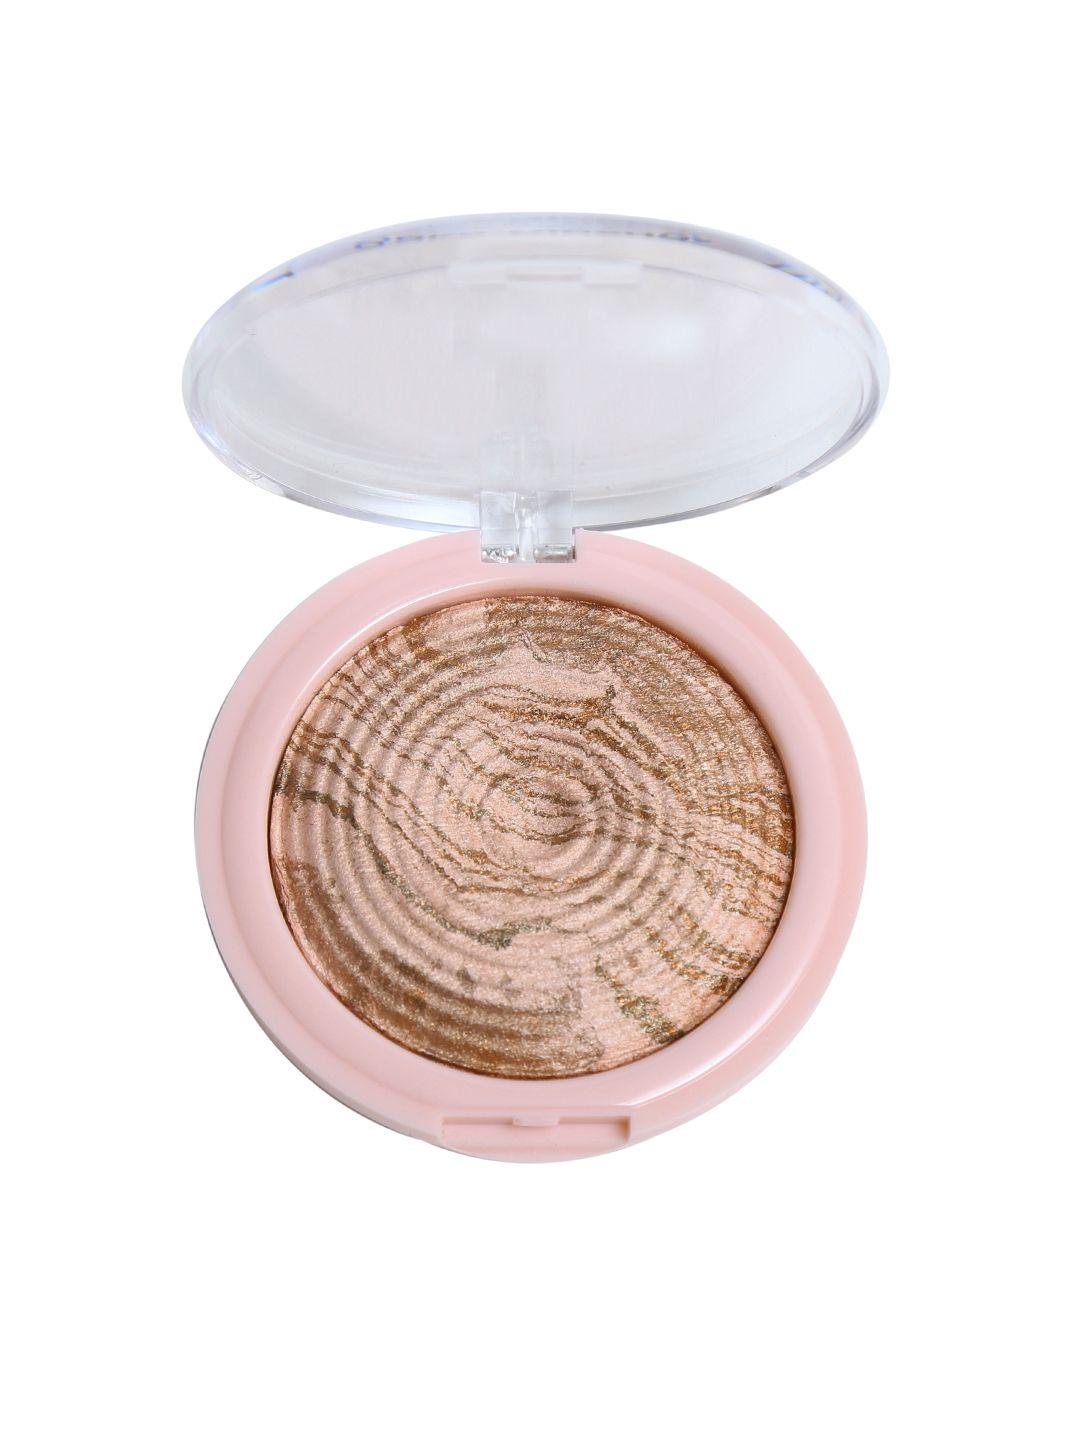 miss-claire-06-baked-blusher-8g